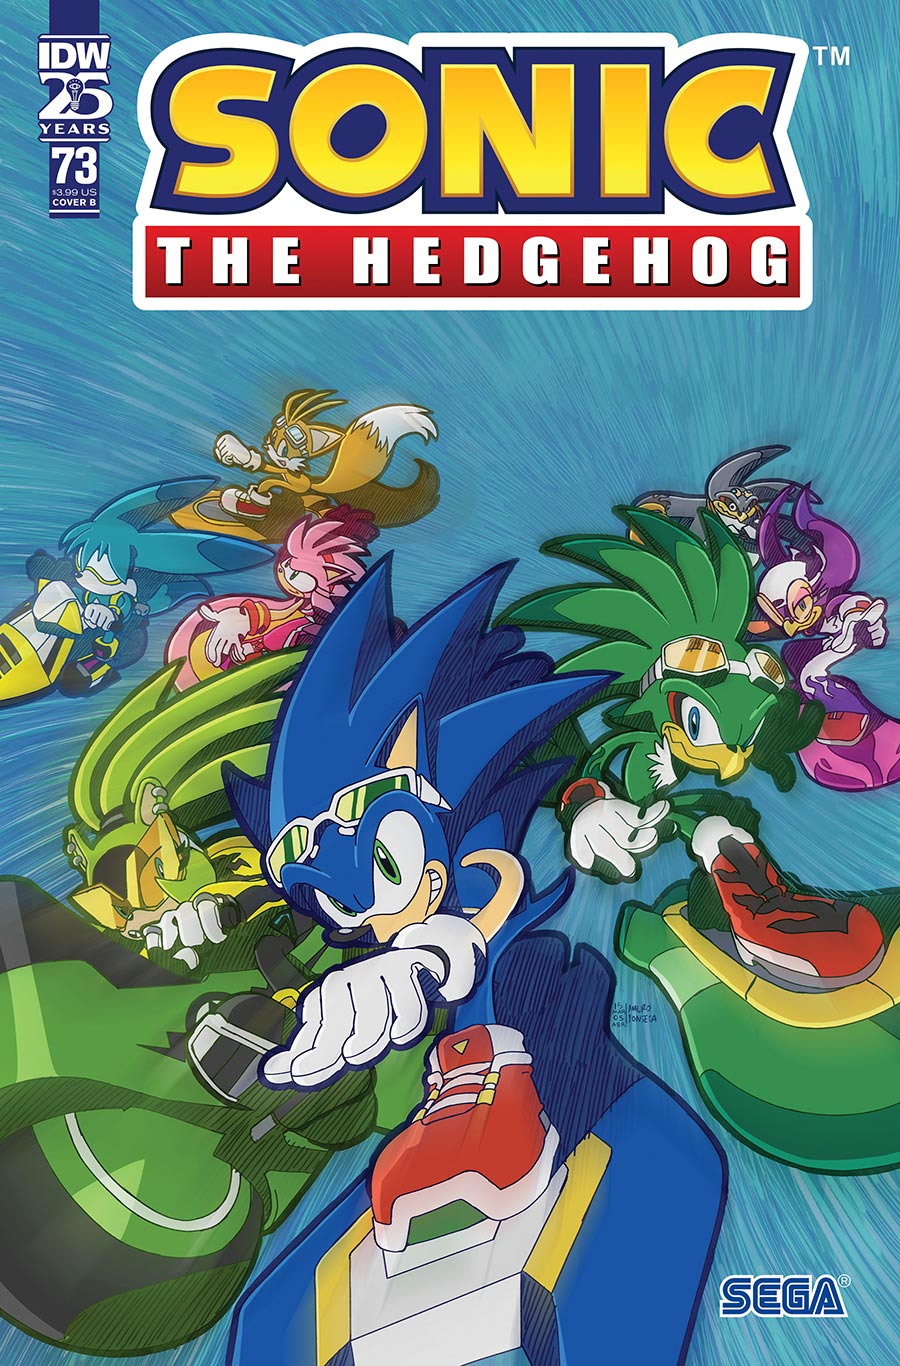 Sonic The Hedgehog Vol 3 #73 Cover B Variant Mauro Fonseca Cover